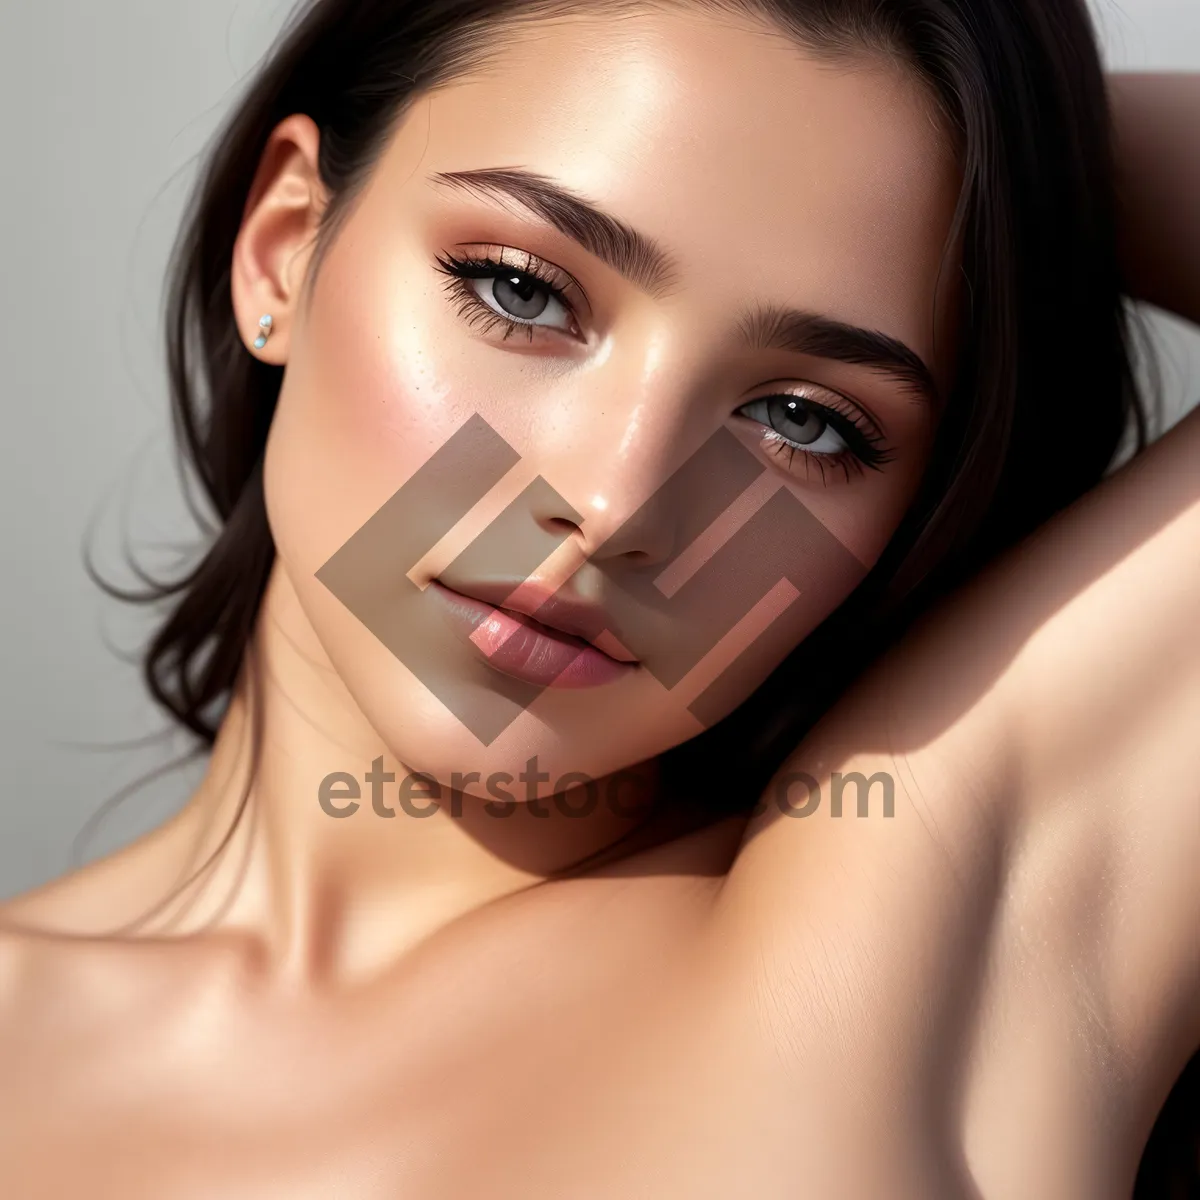 Picture of Radiant Beauty: Attractive Model with Healthy Skin and Sensual Lips